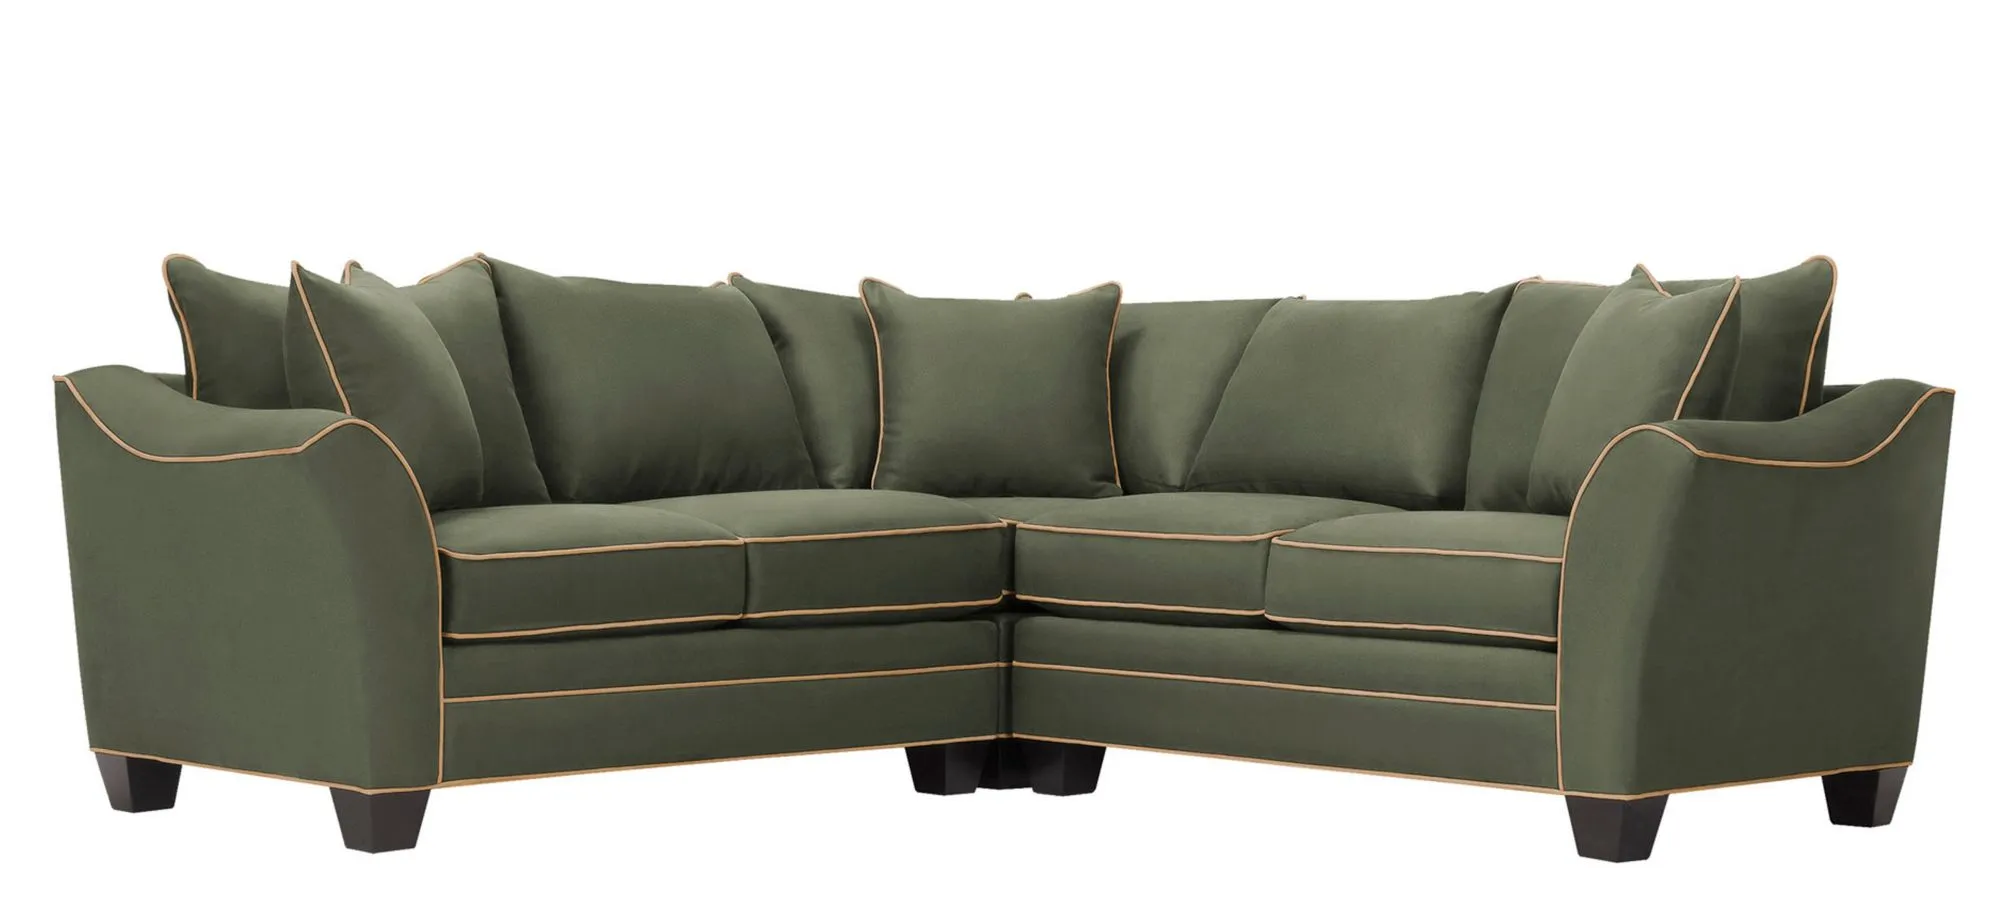 Foresthill 3-pc. Symmetrical Loveseat Sectional Sofa in Suede So Soft Pine/Khaki by H.M. Richards